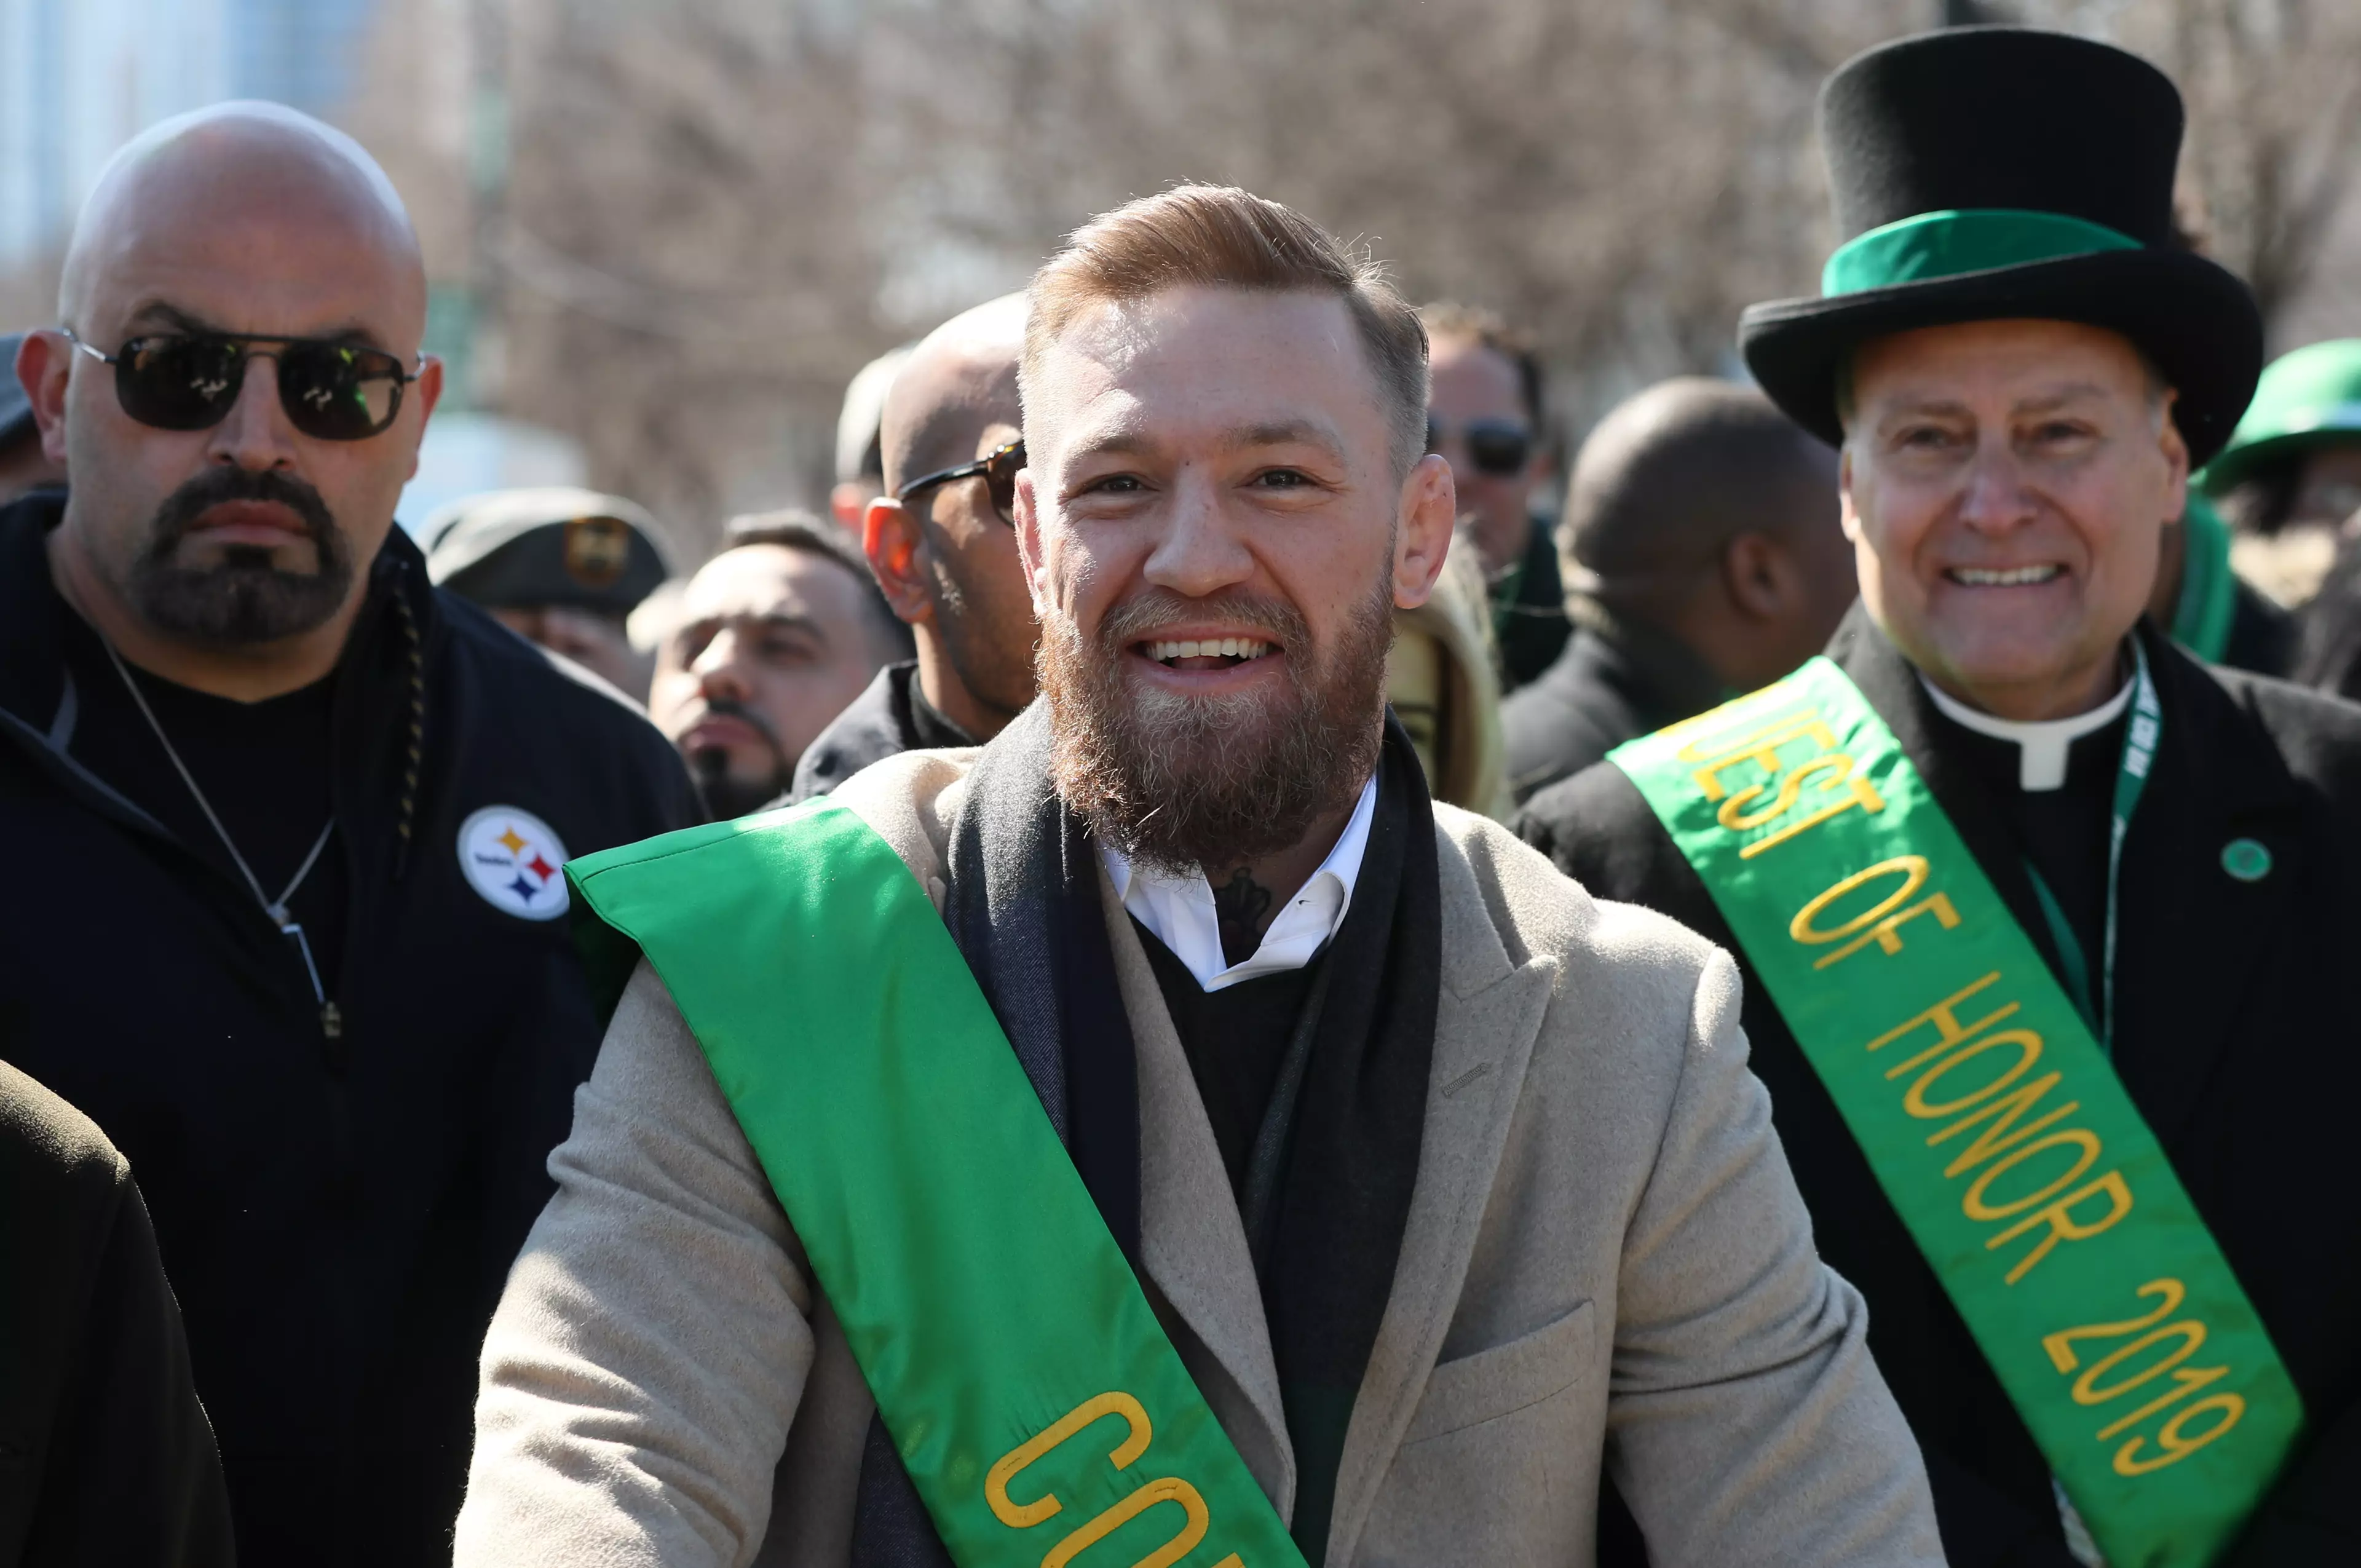 McGregor was most recently seen at Chicago's St Patrick's Day parade.